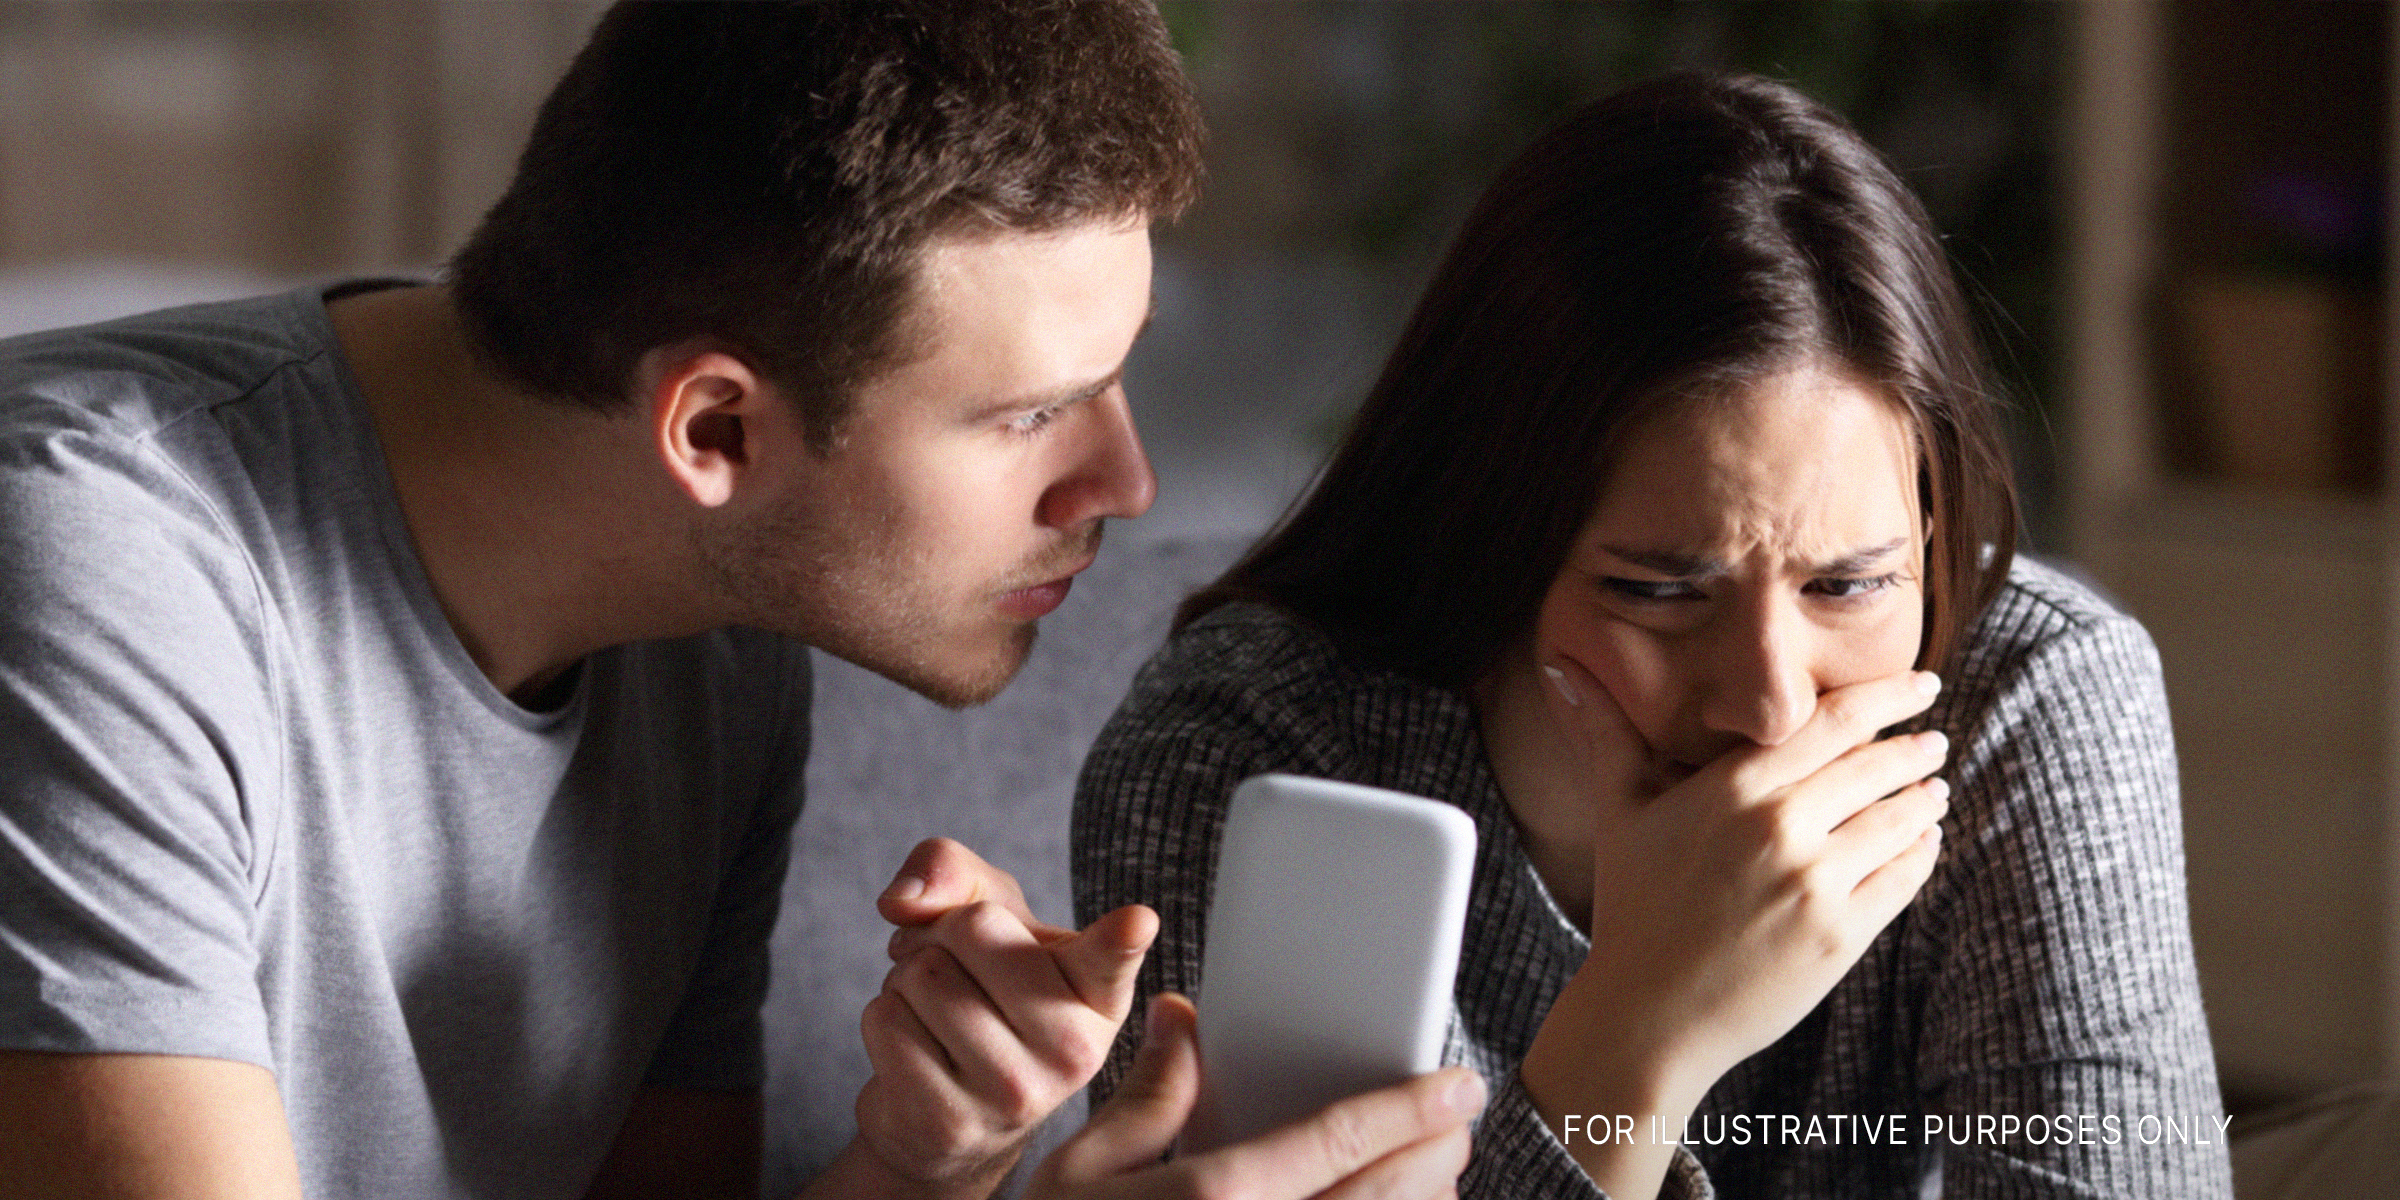 An angry man shows a cell phone to his seemingly embarrassed girlfriend | Source: Shutterstock